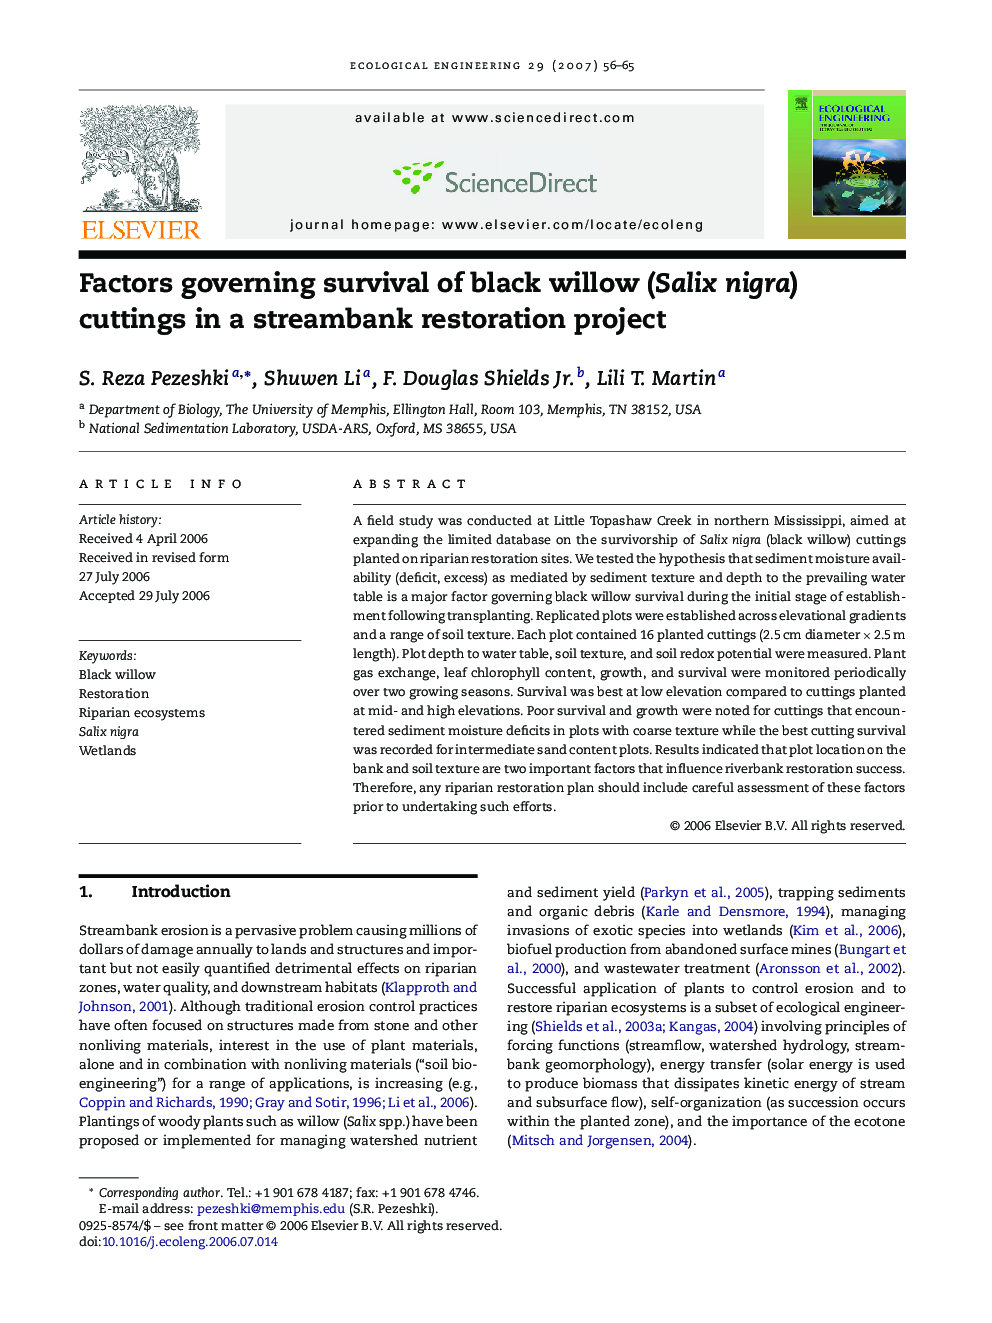 Factors governing survival of black willow (Salix nigra) cuttings in a streambank restoration project